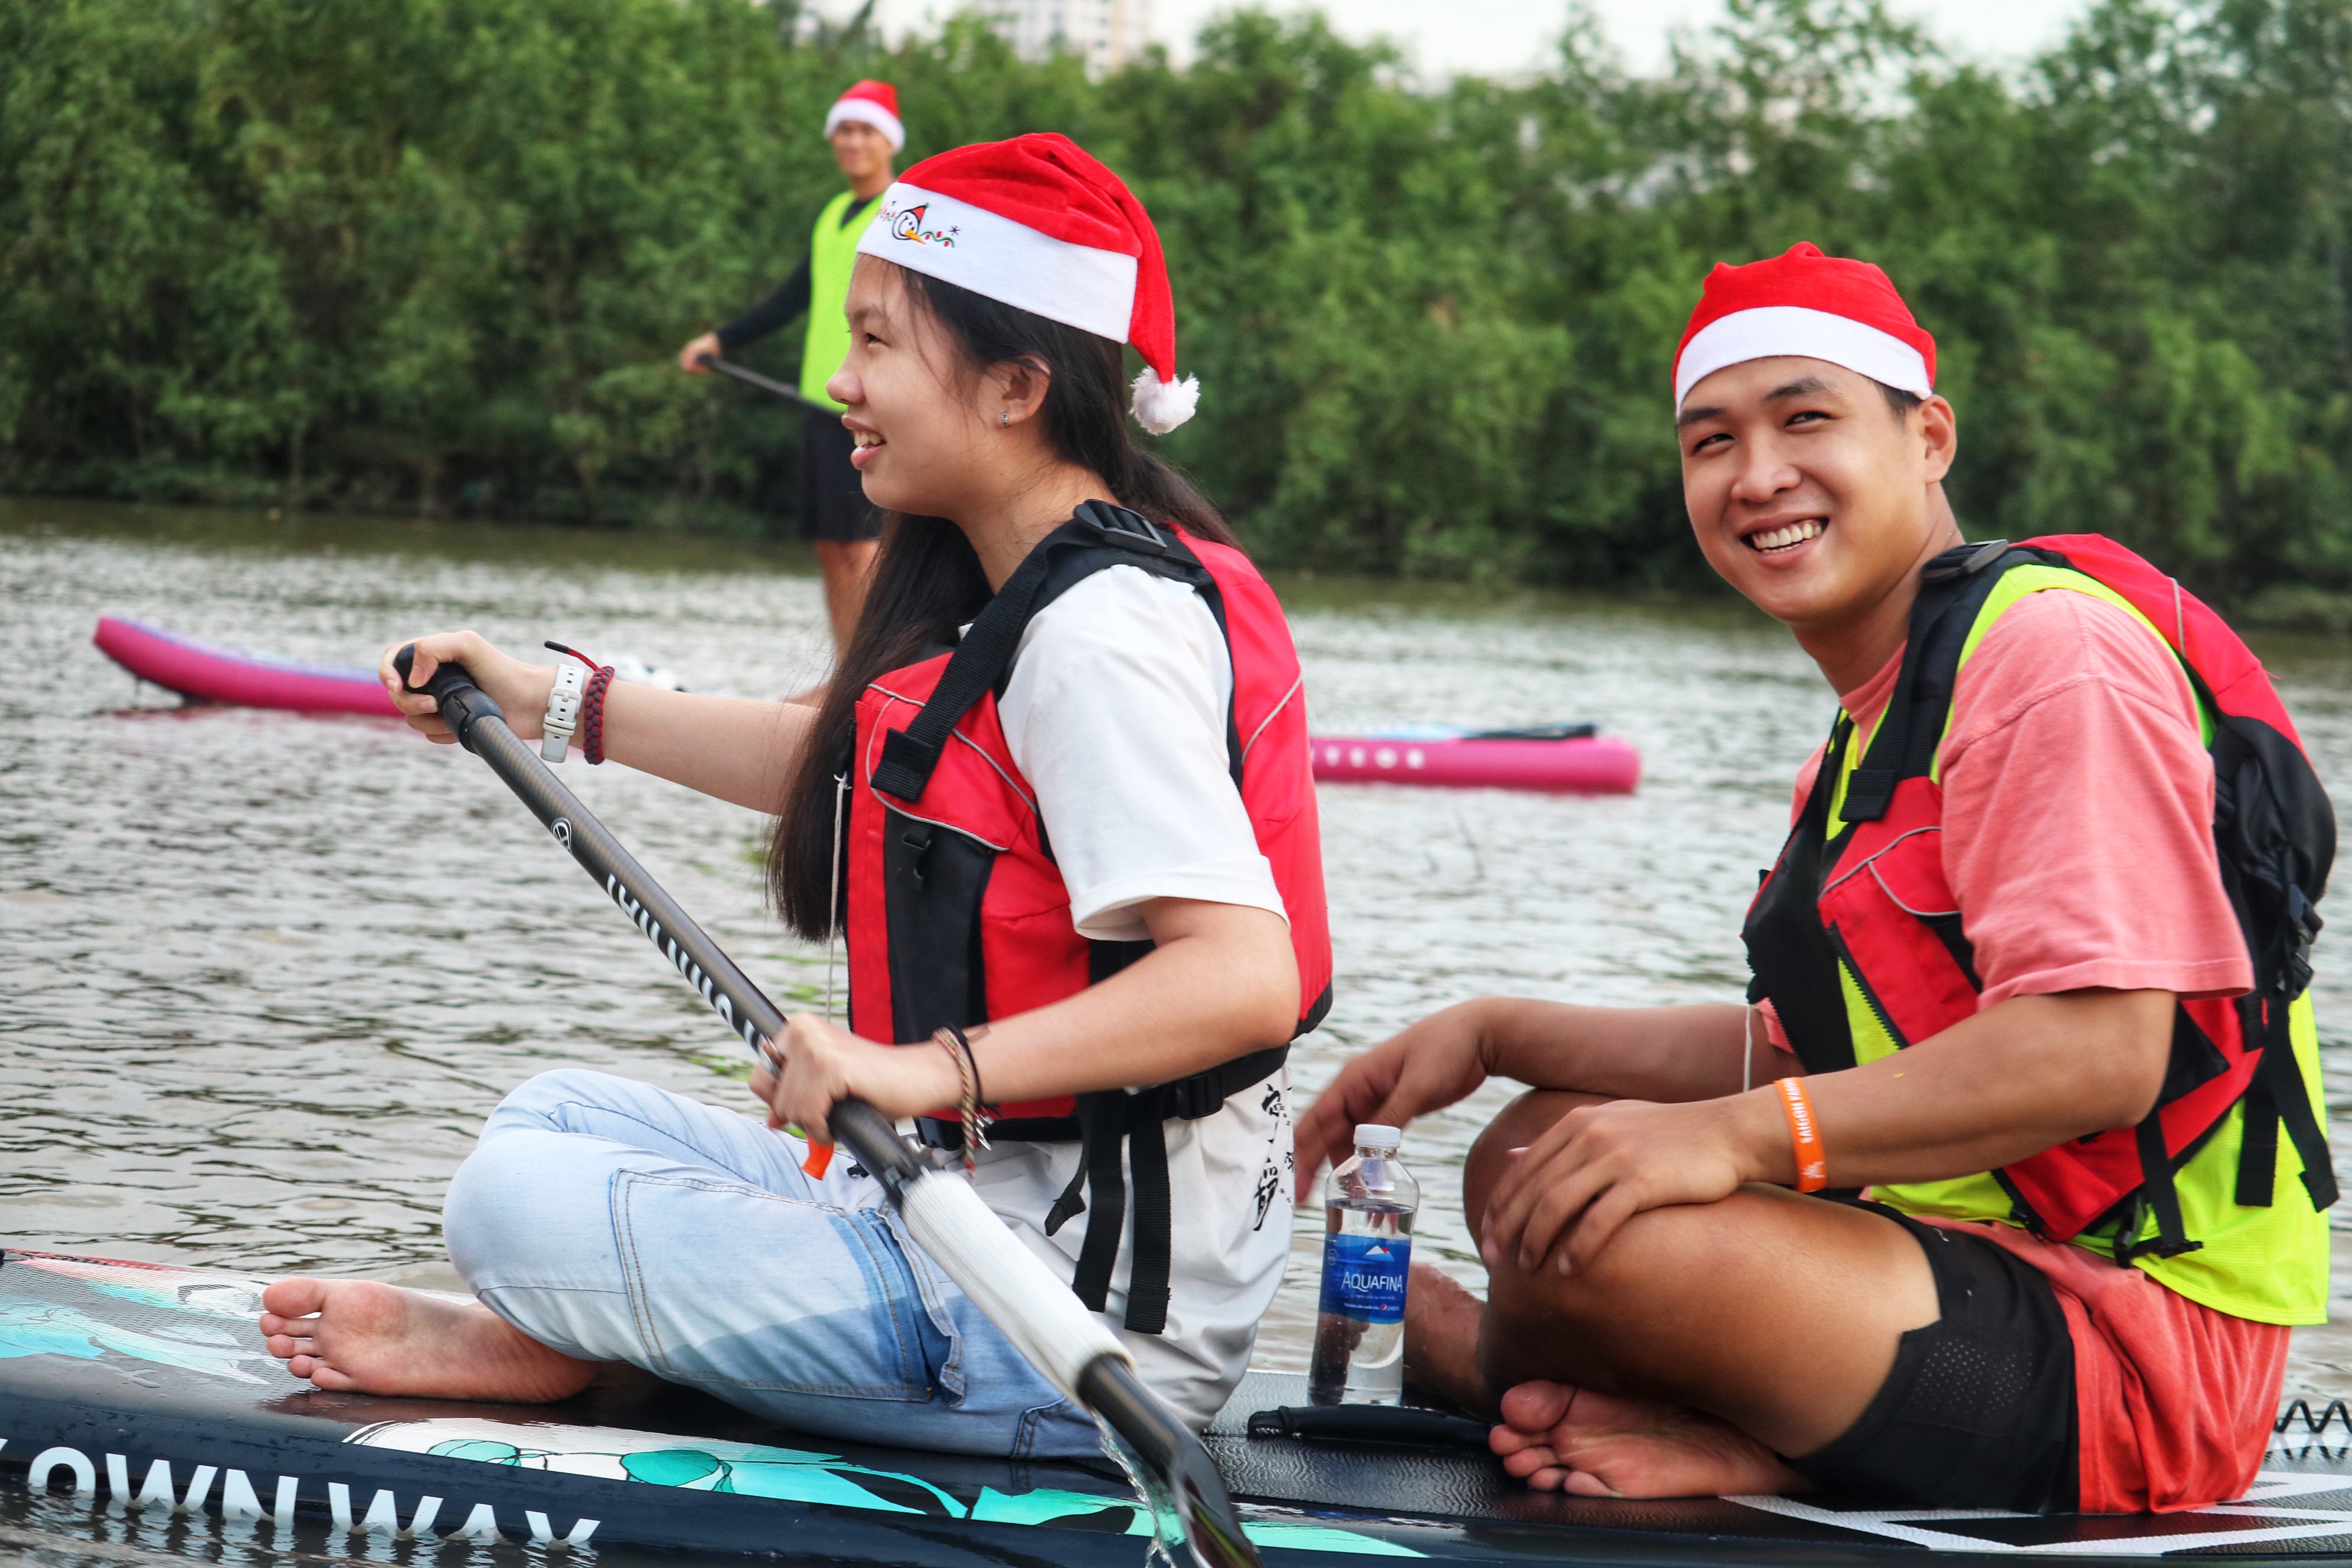 Hoang Vy (left) enjoys her first SUP tour ever with her coach. Photo: Hoang An / Tuoi Tre News